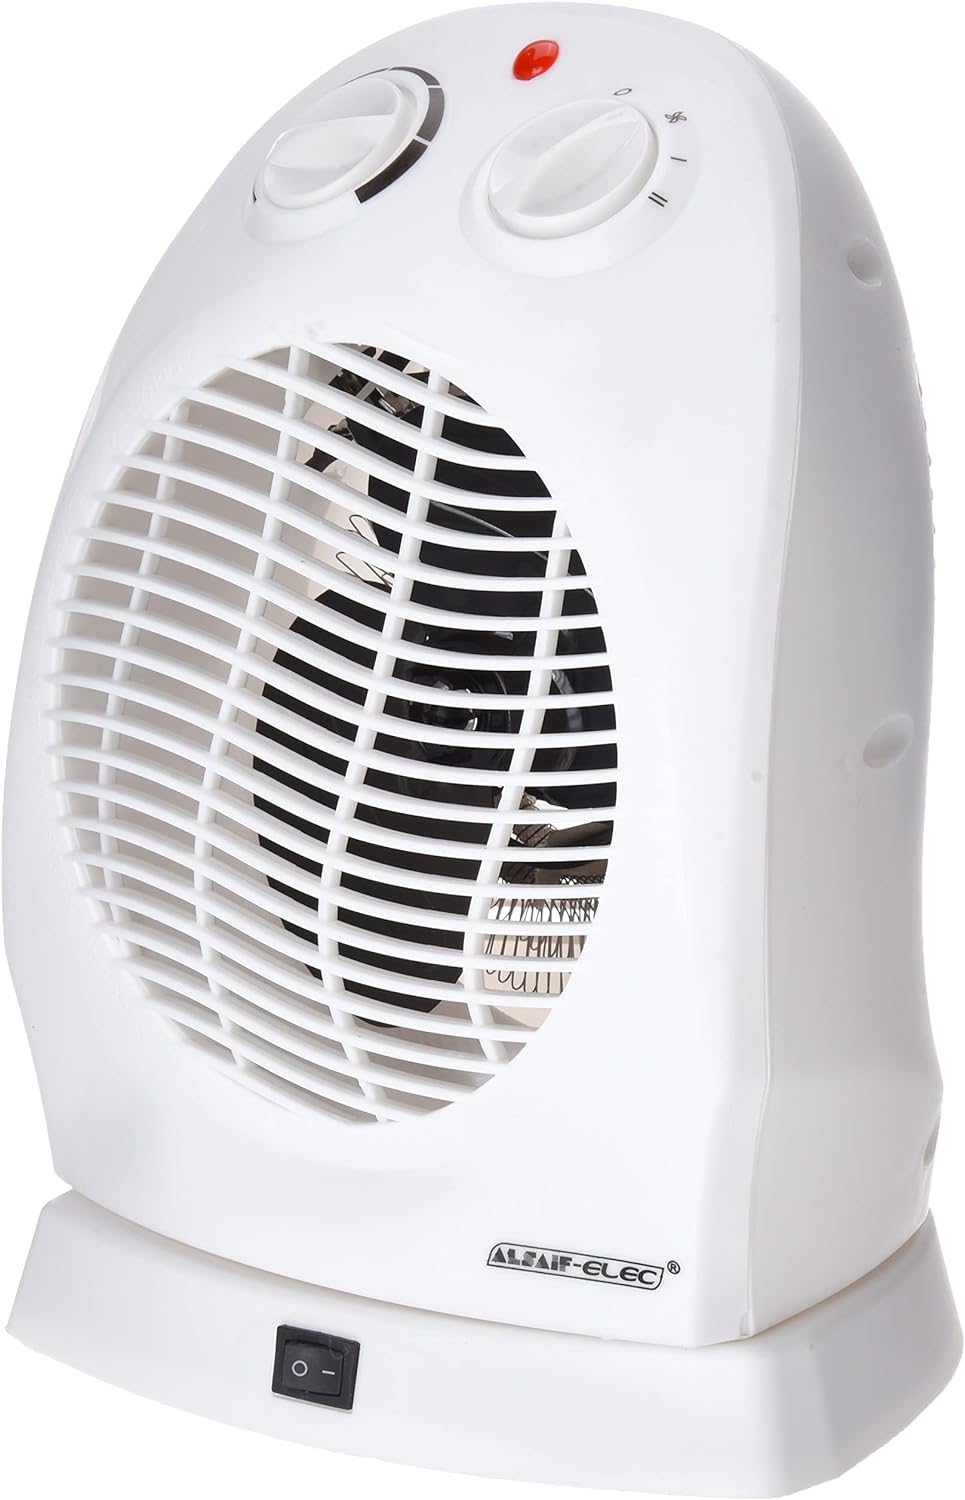 ALSAIF 2000W Electric Fan Heater Oscillation, Temperature control switch (low / high), Adjustable thermostat, Overheating safety cutout, 90 Degree Rotation, White, AL1605 2 Years warranty